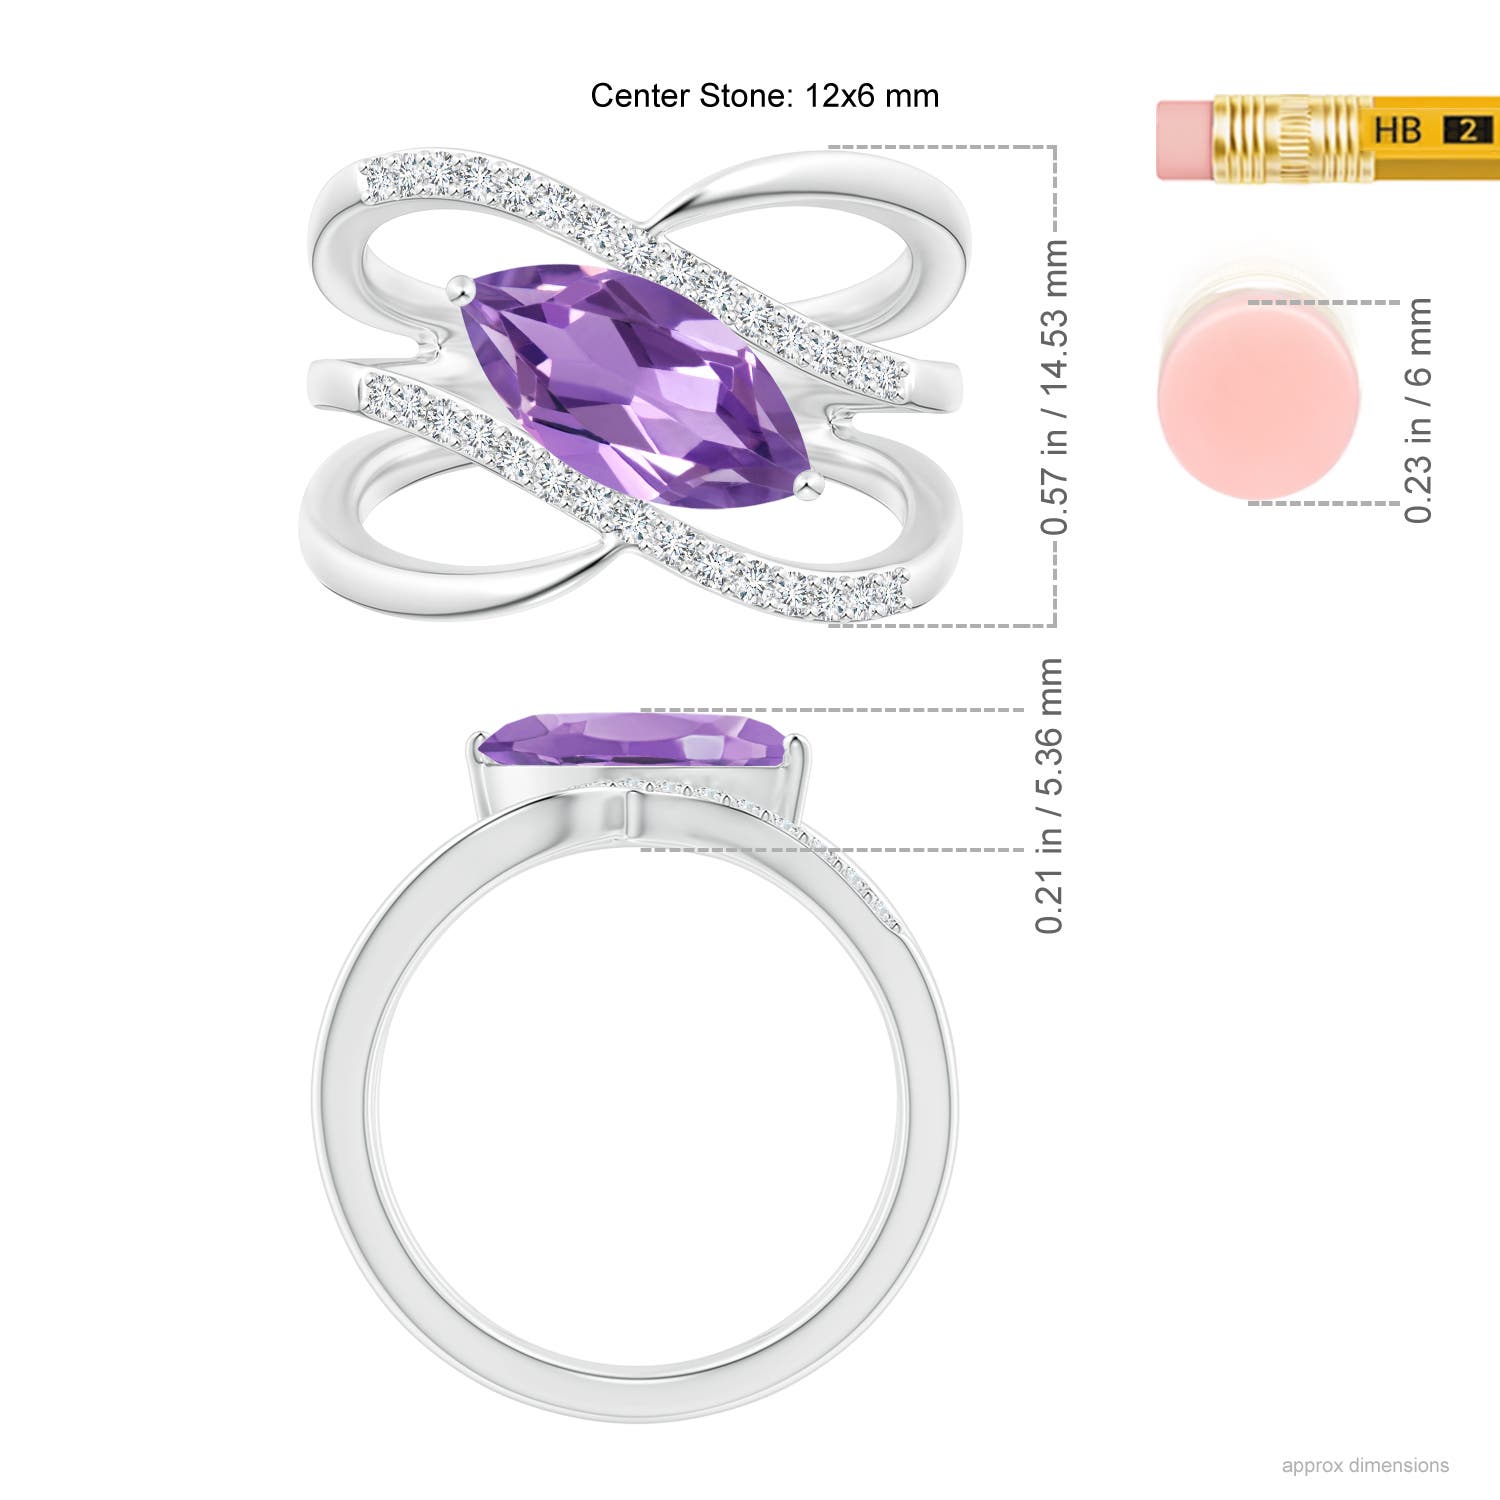 A - Amethyst / 1.54 CT / 14 KT White Gold